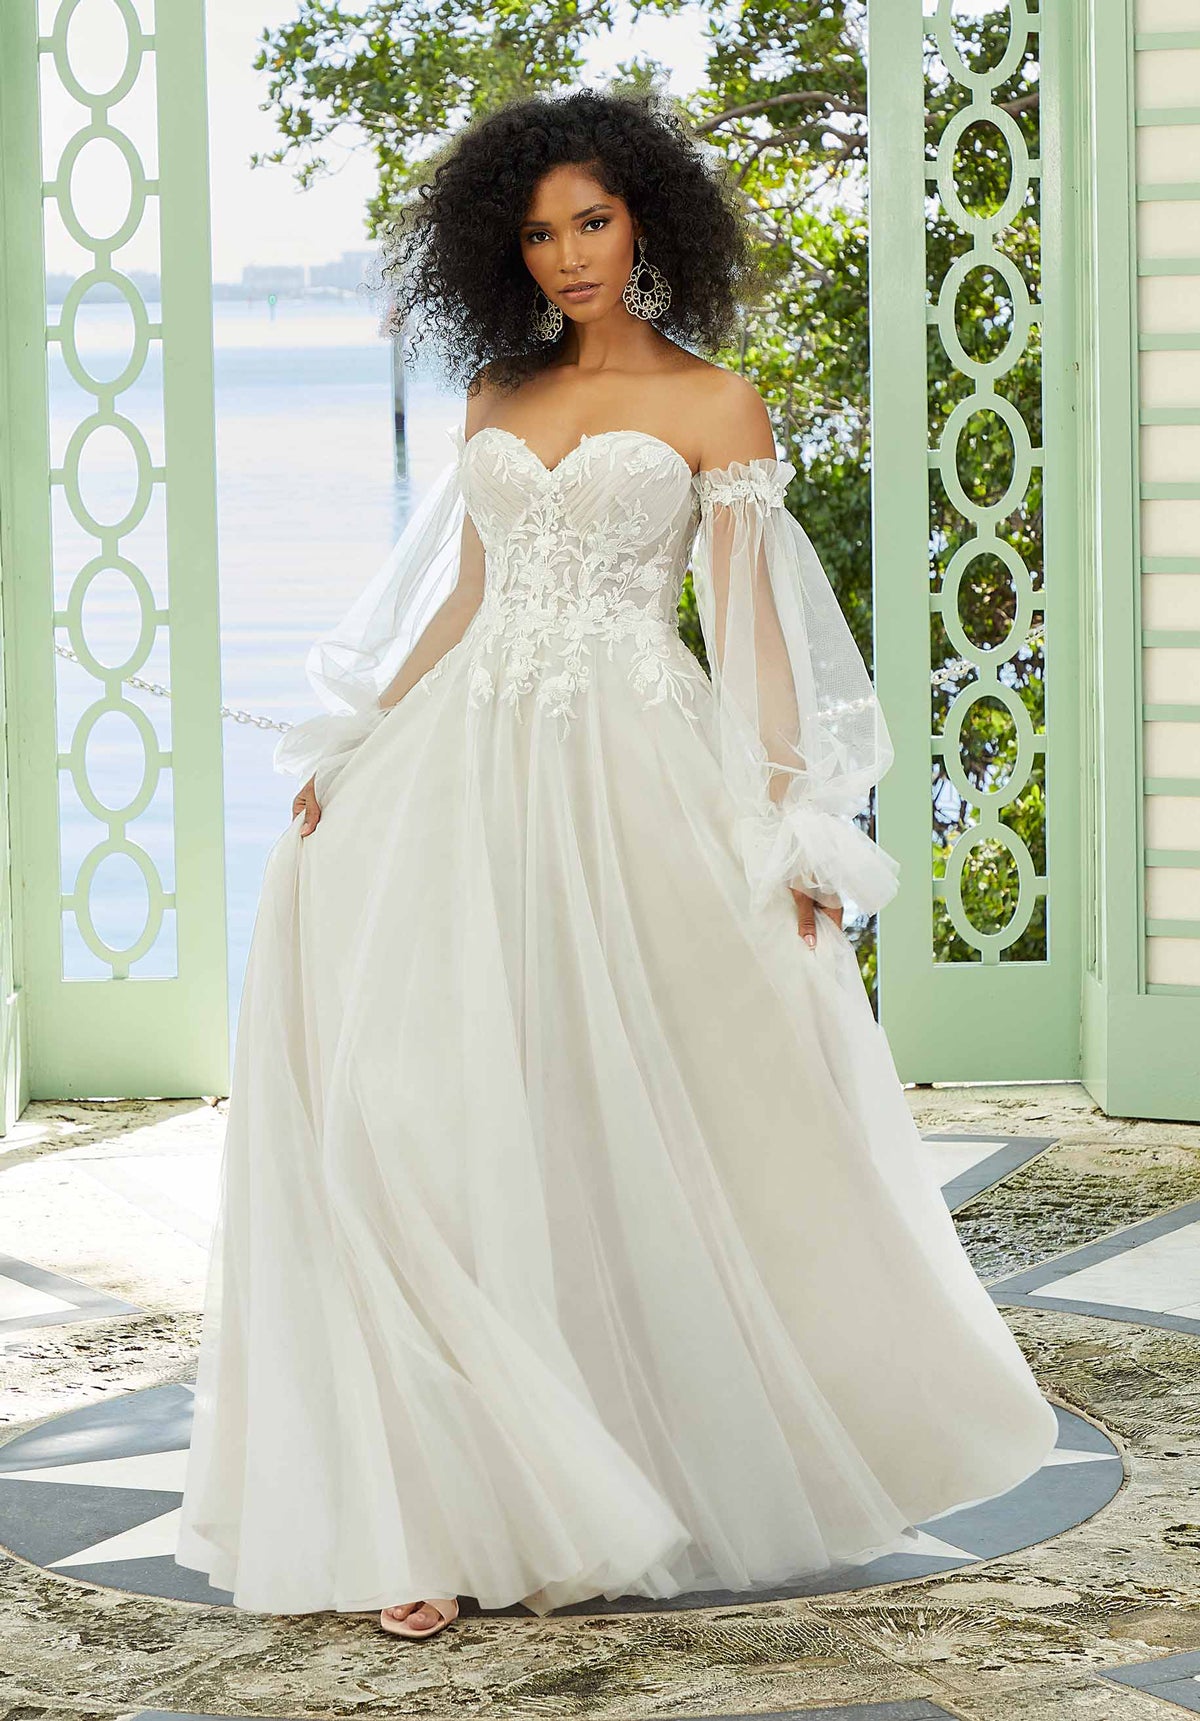 Voyage - 6971 - Franzetta - Cheron's Bridal, Wedding Gown - Morilee Voyage - - Wedding Gowns Dresses Chattanooga Hixson Shops Boutiques Tennessee TN Georgia GA MSRP Lowest Prices Sale Discount